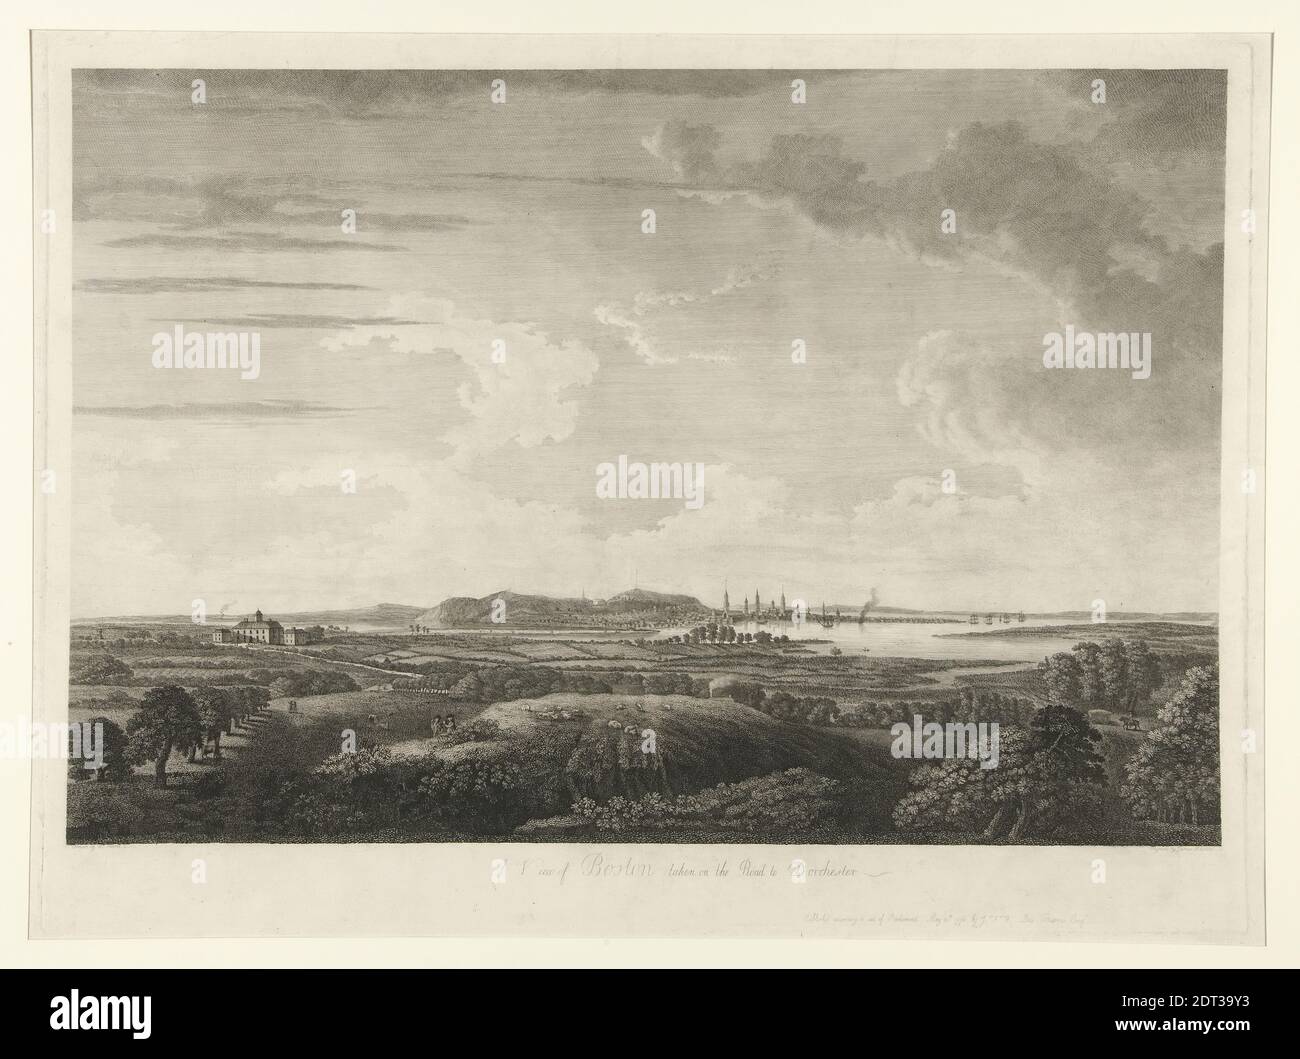 Artist: James Newton, American, After: William Pierrie, American, A View of Boston taken on the road to Dorchester, Line engraving, black and white, sheet: 58.5 × 83.5 cm (23 1/16 × 32 7/8 in.), Made in United States, American, 18th century, Works on Paper - Prints Stock Photo